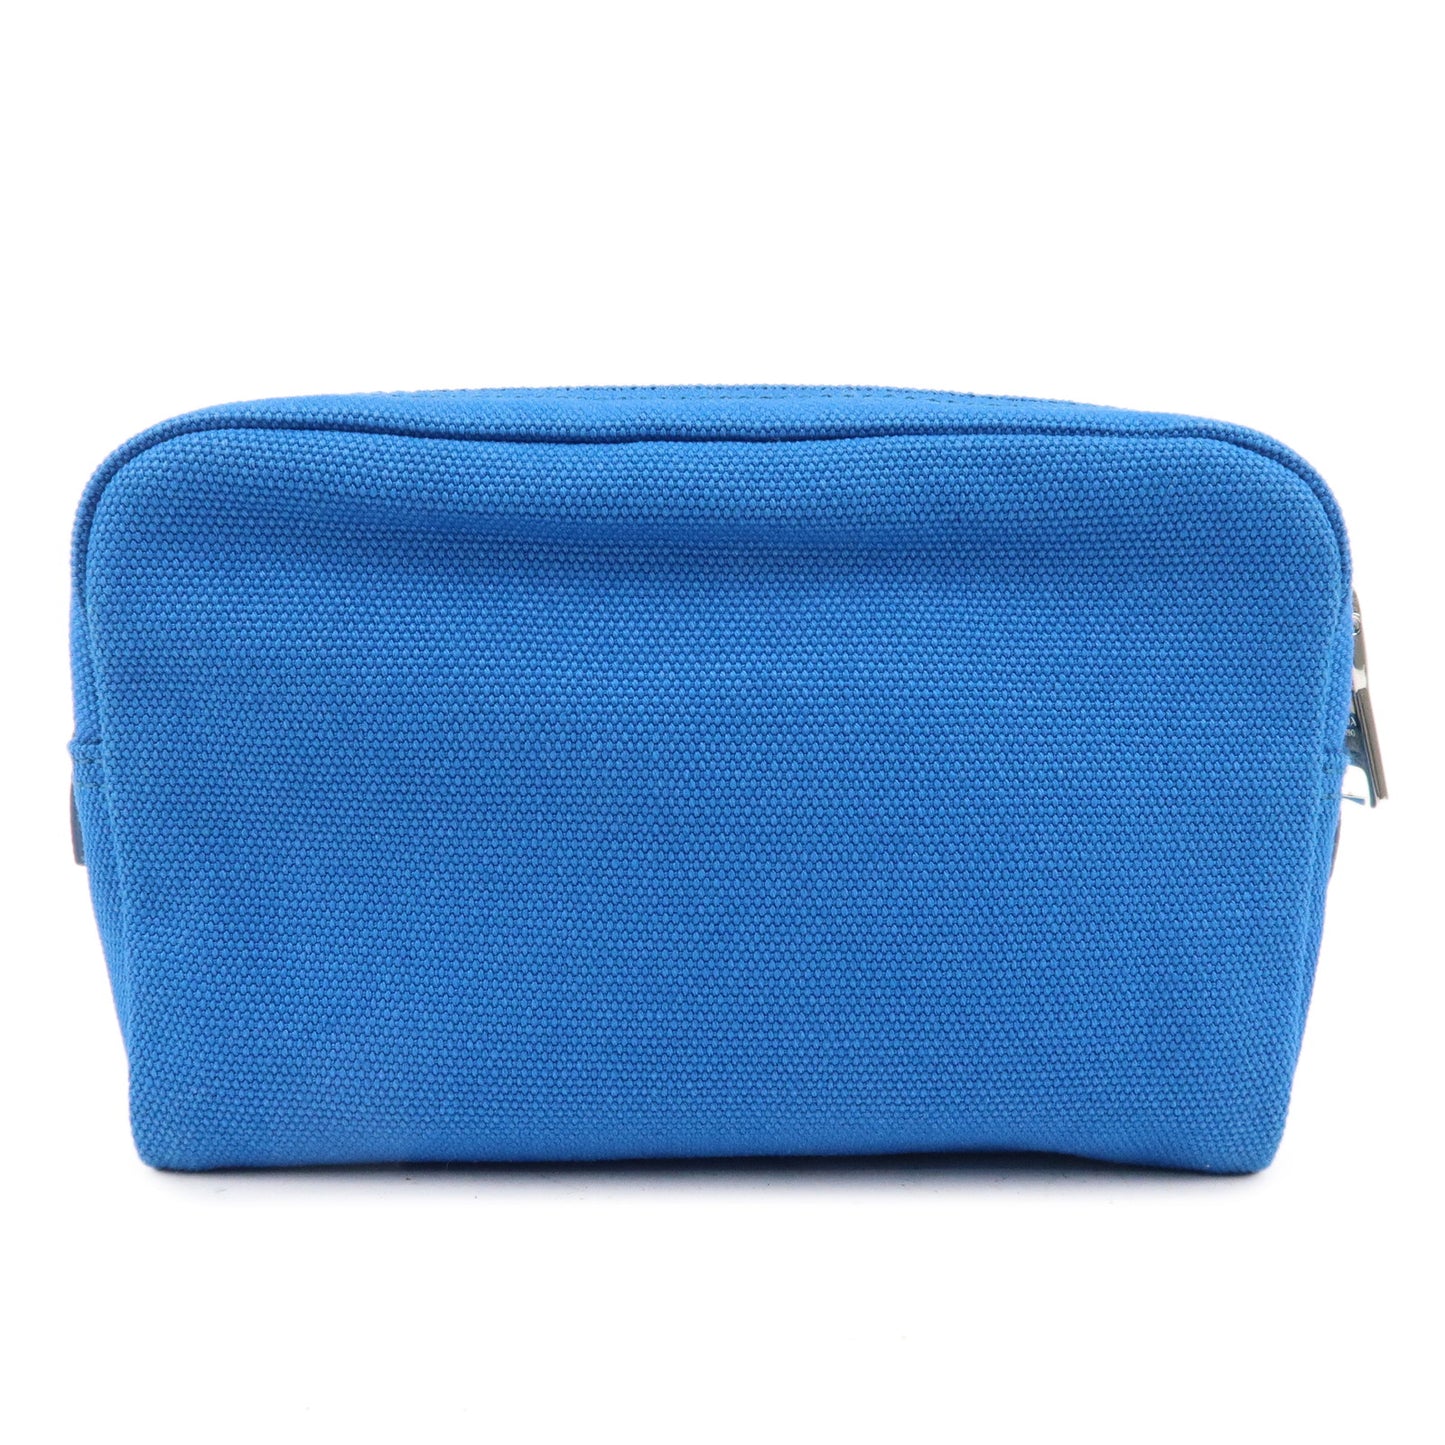 PRADA Canapa Canvas Leather Cosmetic Pouch Blue 1NA693